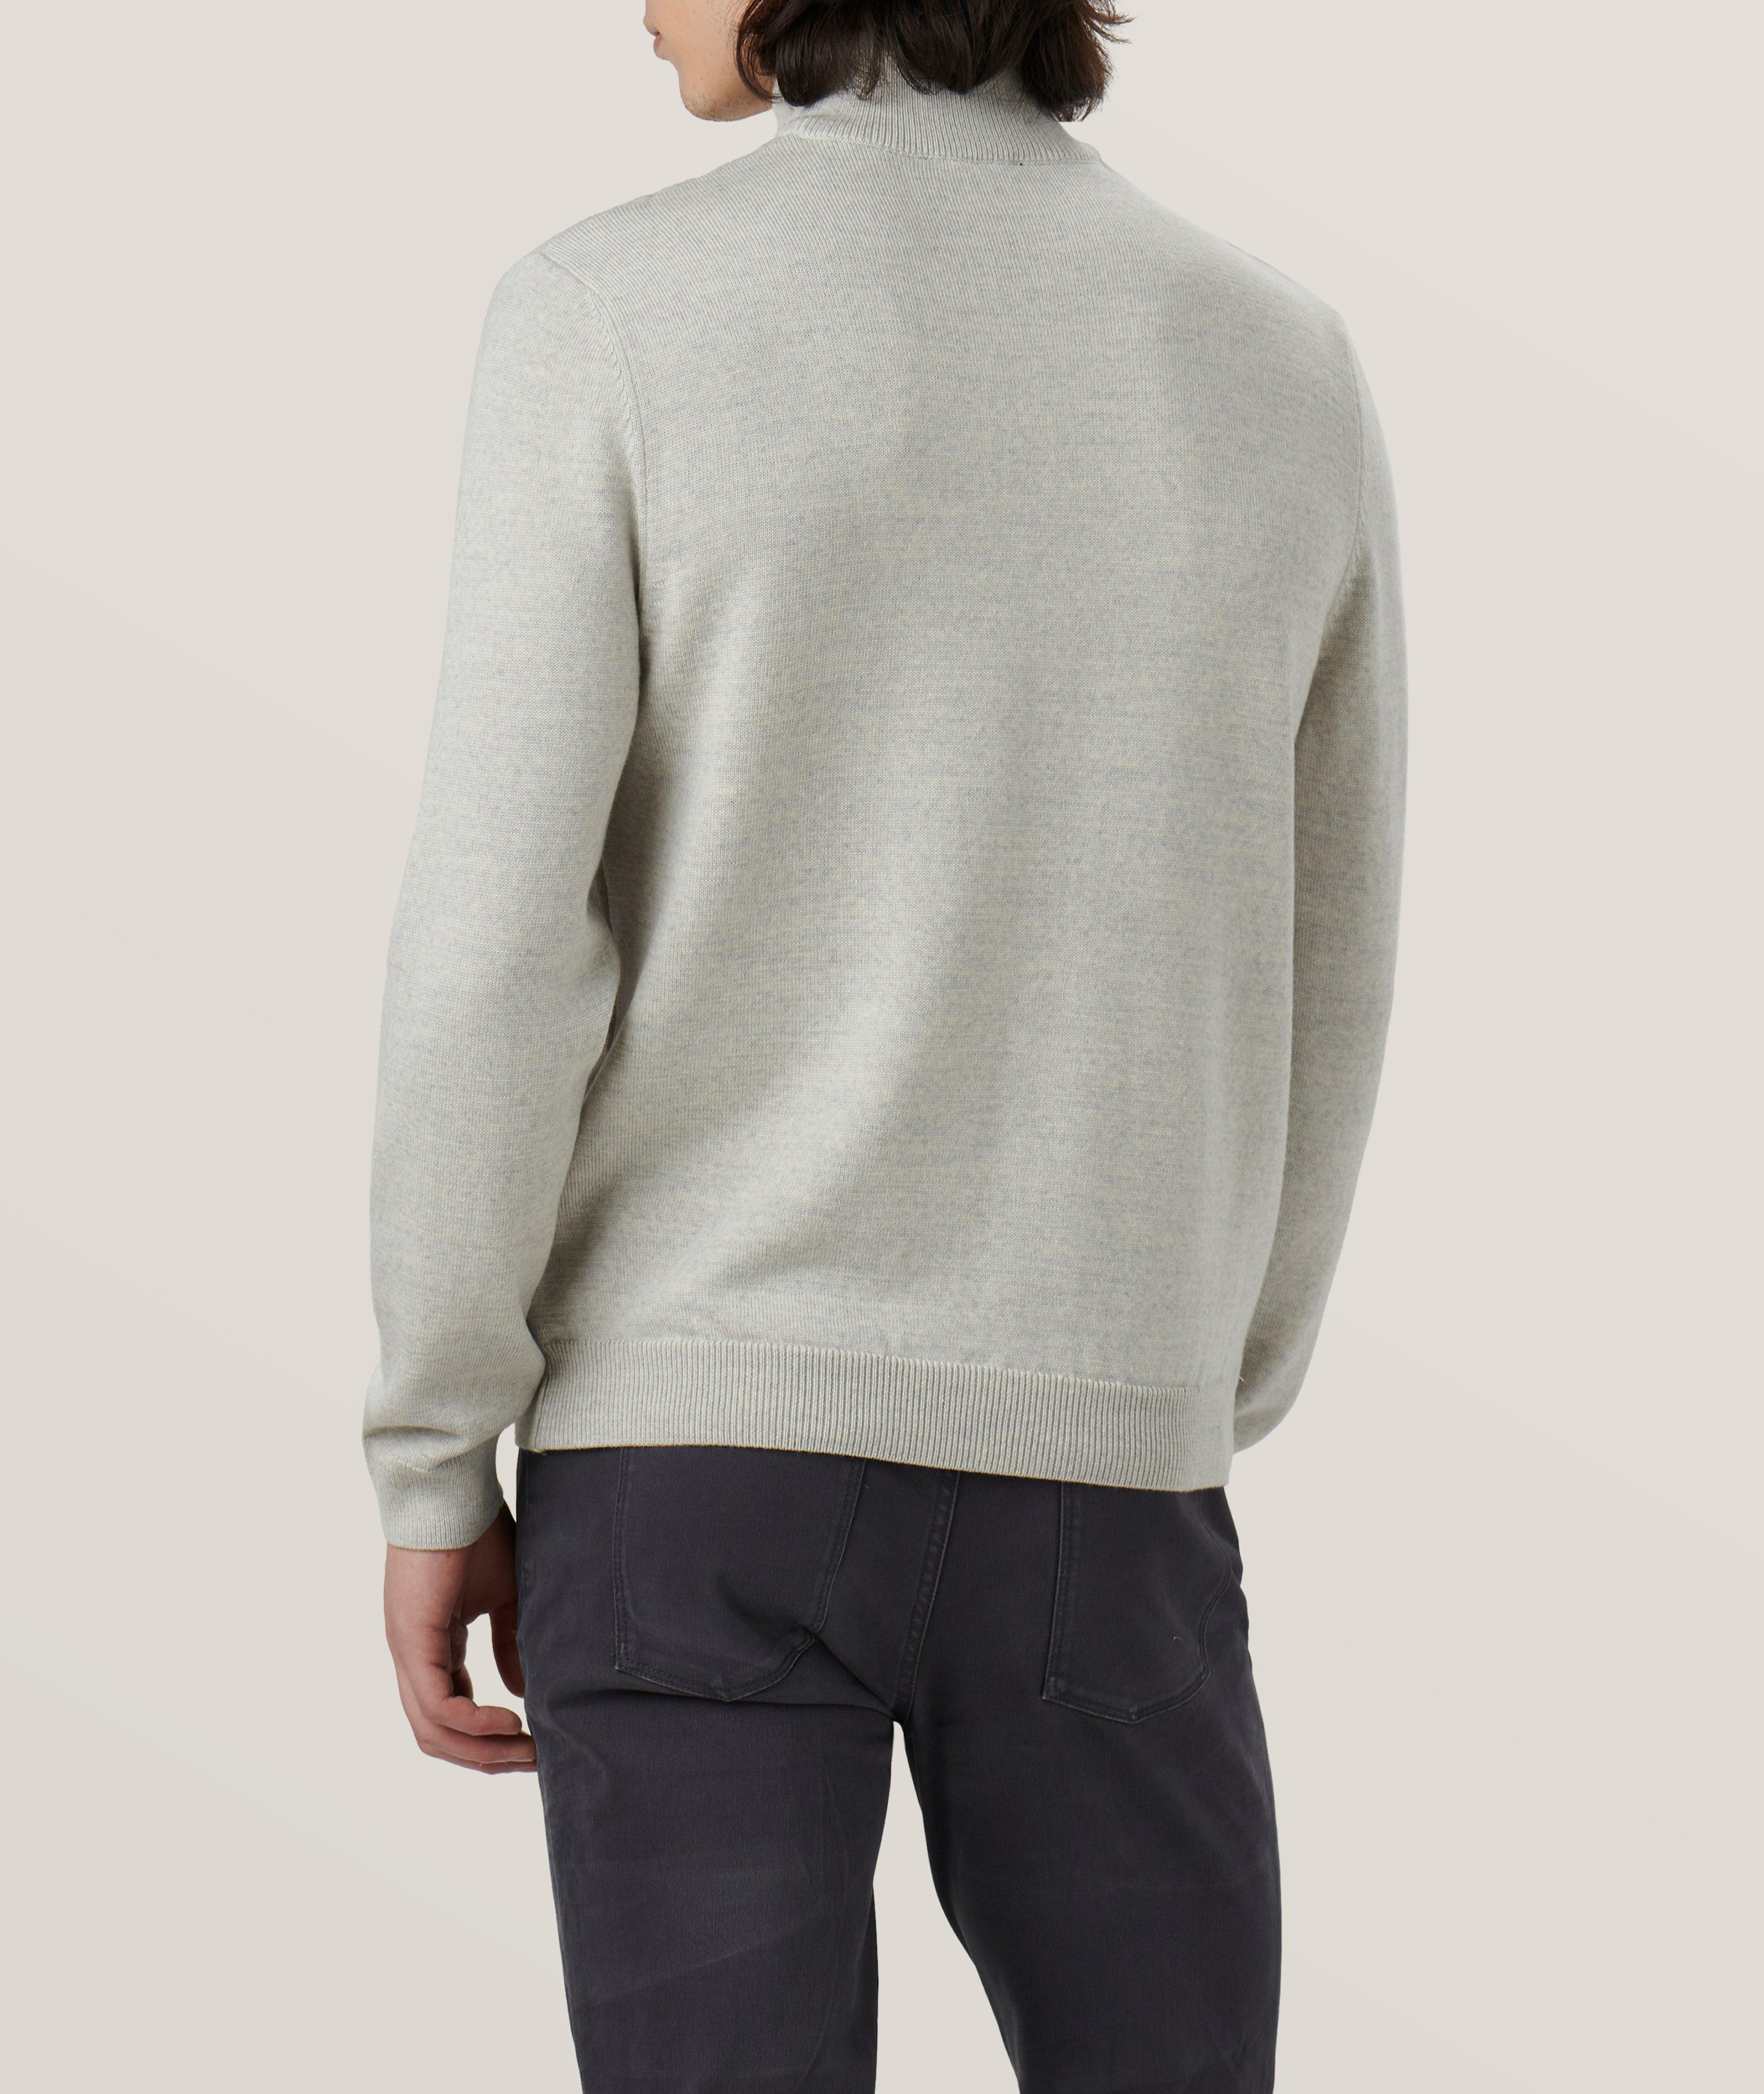 Solid Cotton Sweater  image 4